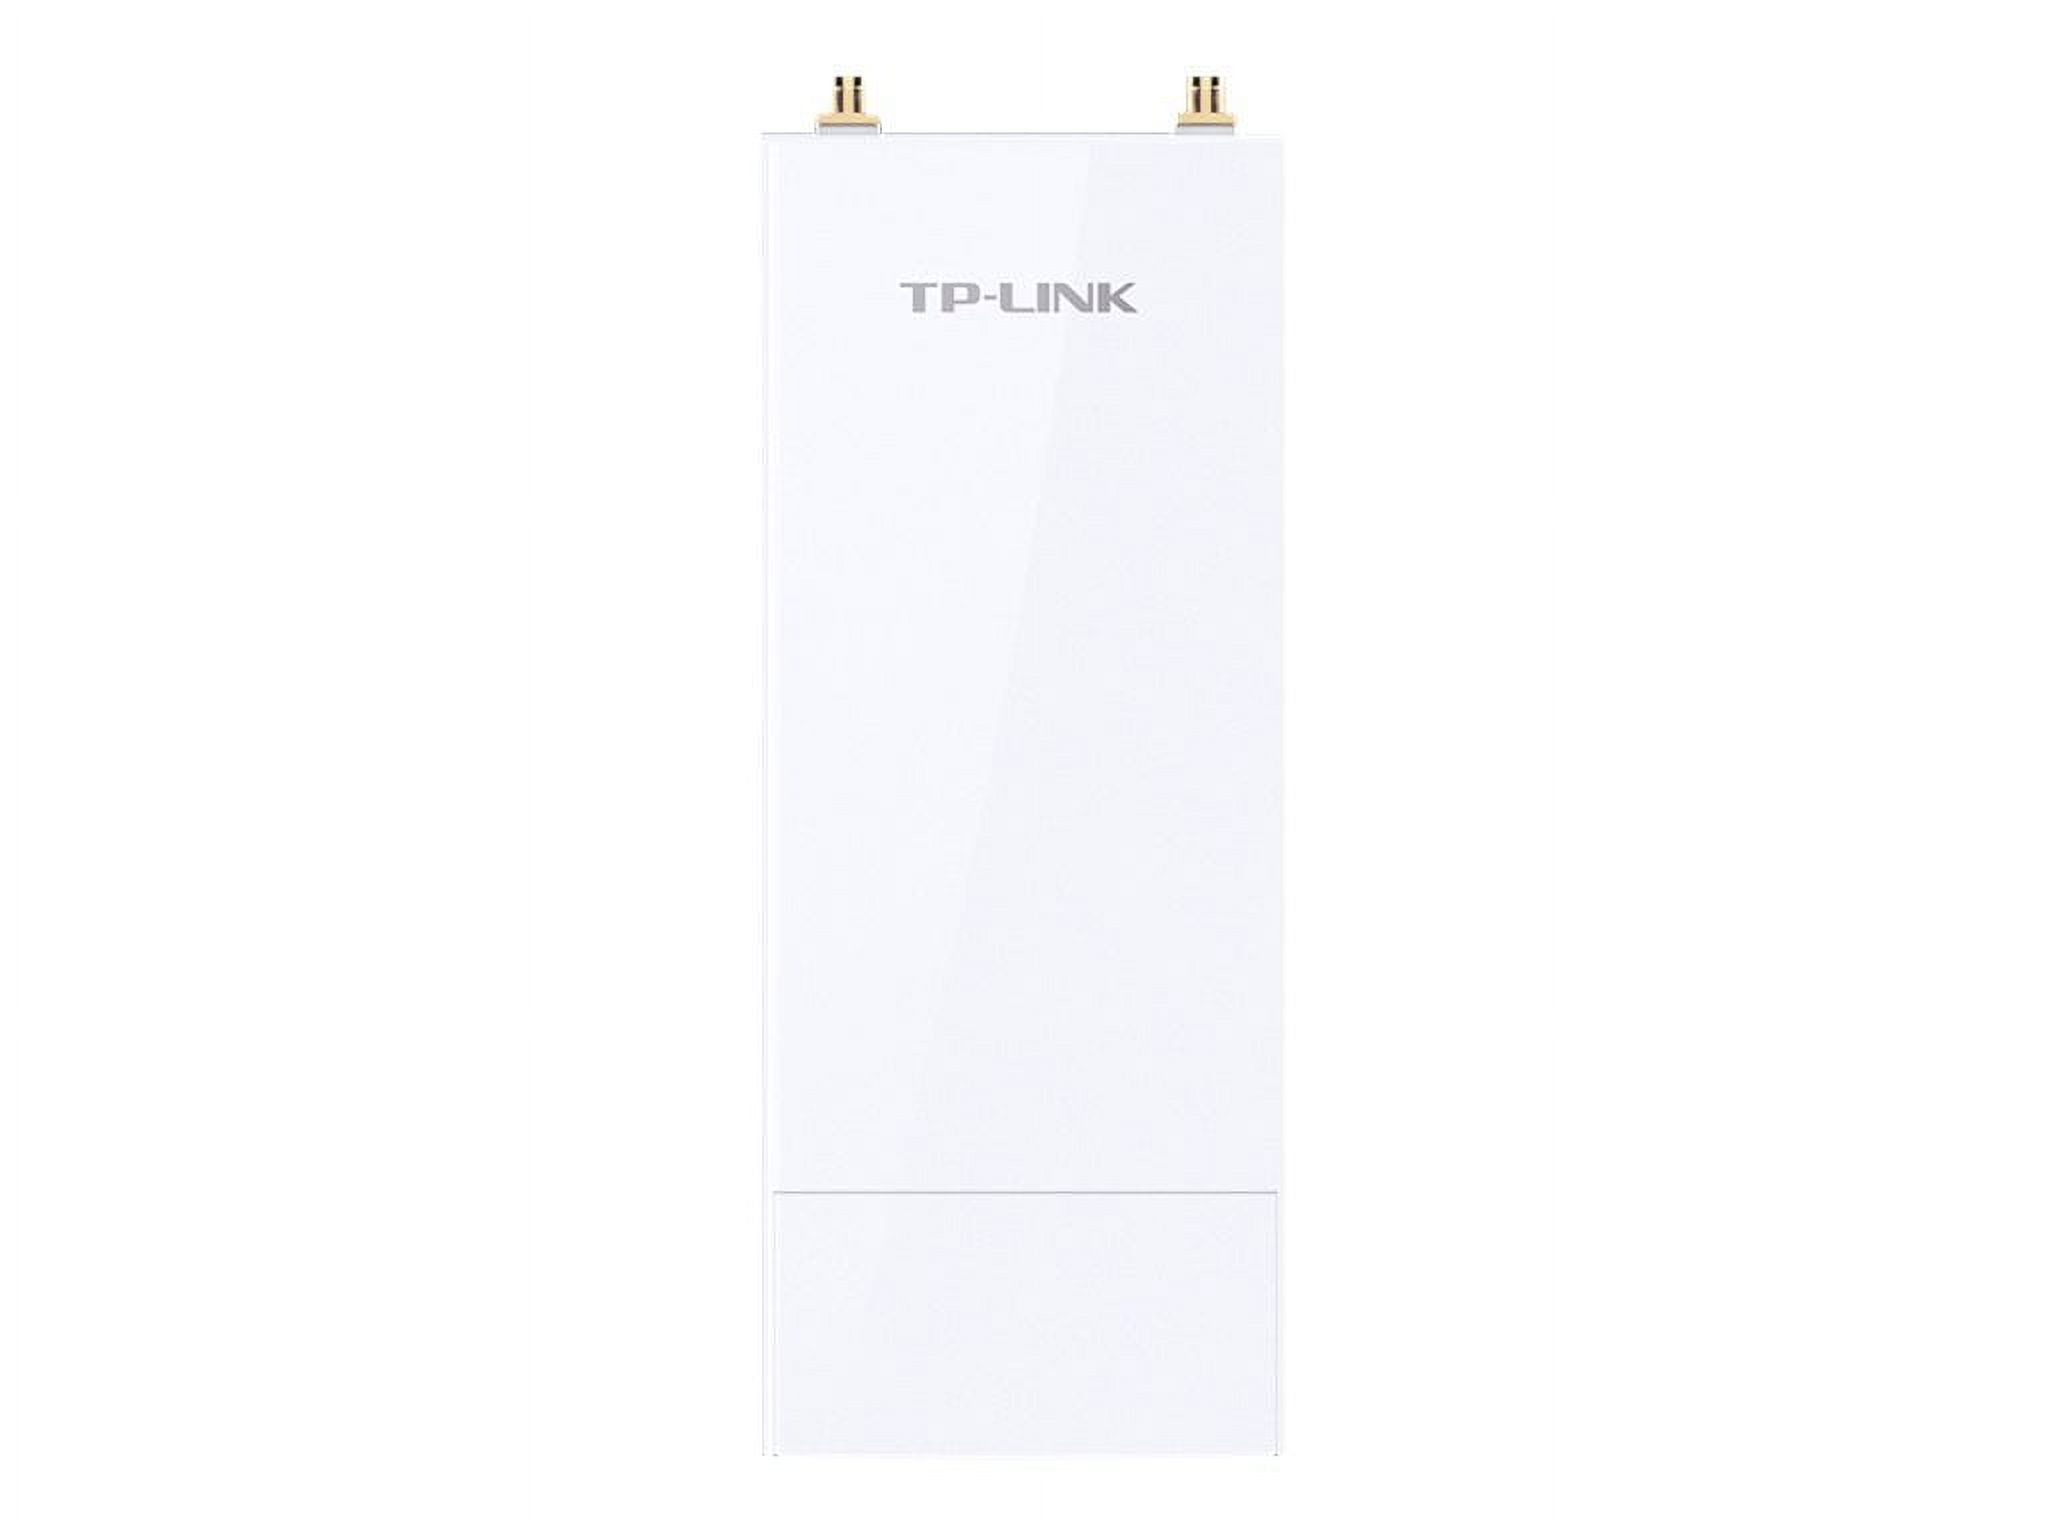 TP-Link WBS510 - Wireless access point - Wi-Fi - 5 GHz - image 1 of 4